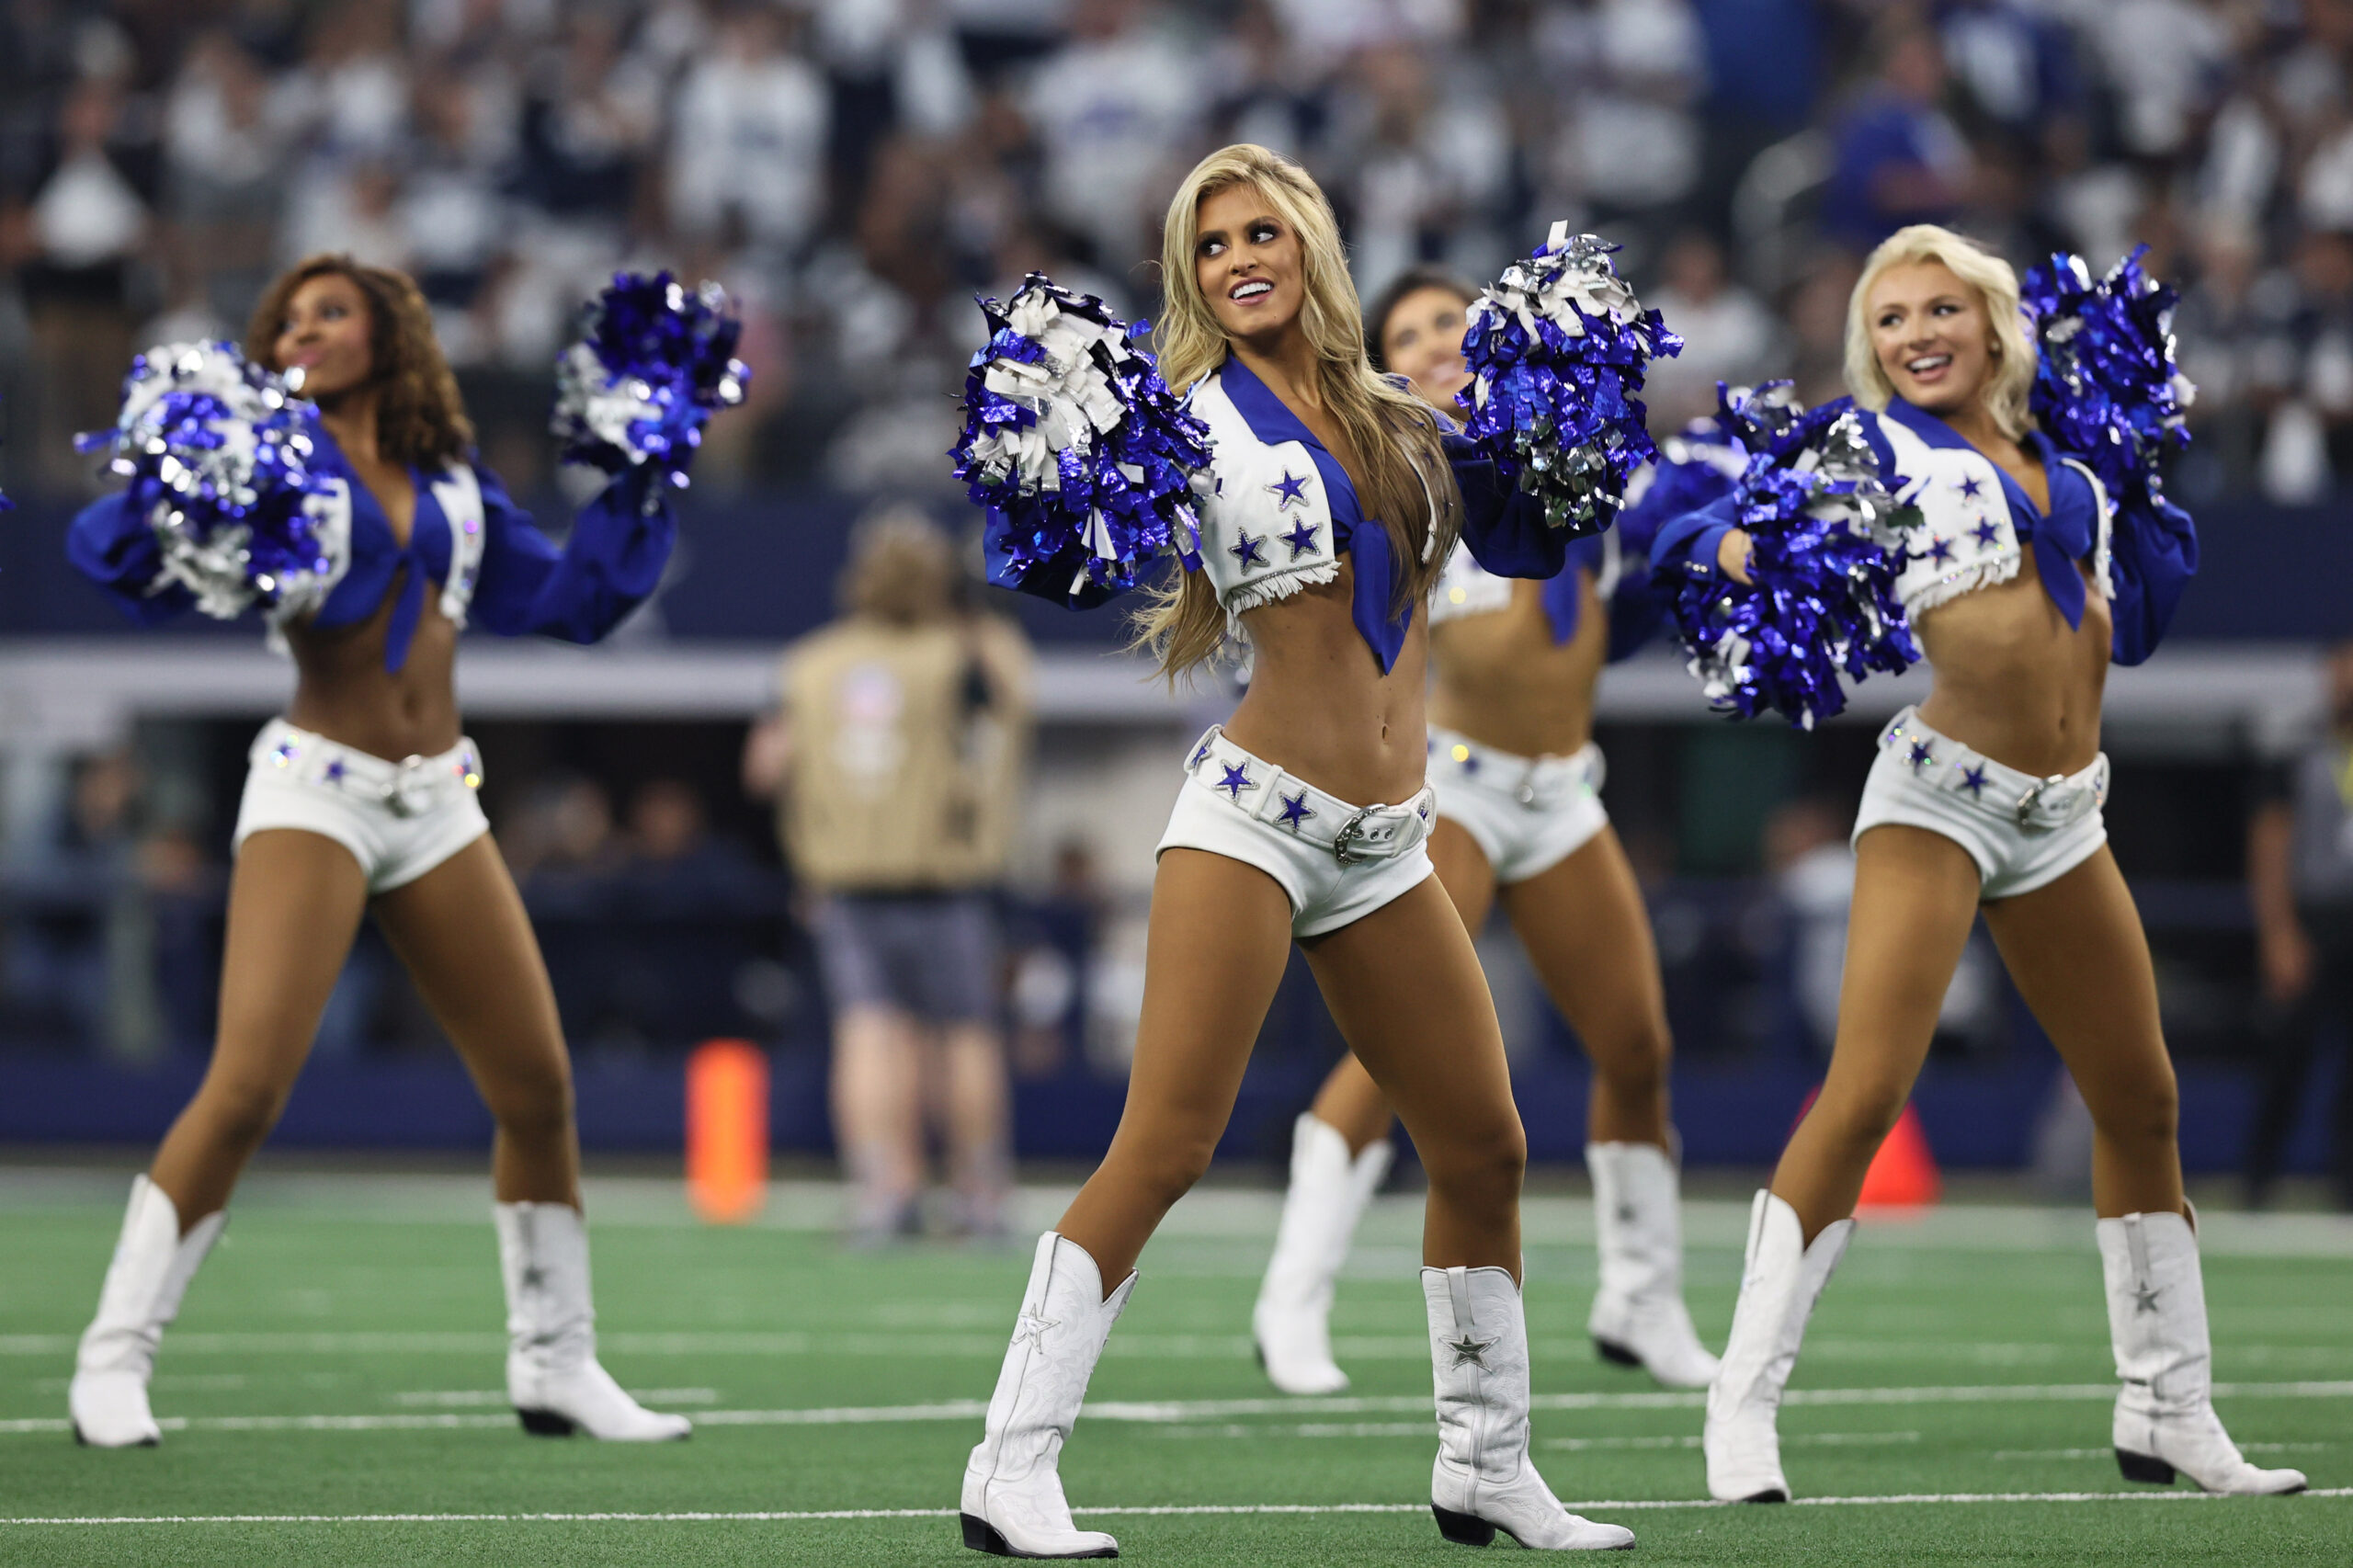 Q&A: Sarah Hepola On Why the Dallas Cowboys Cheerleaders Deserve